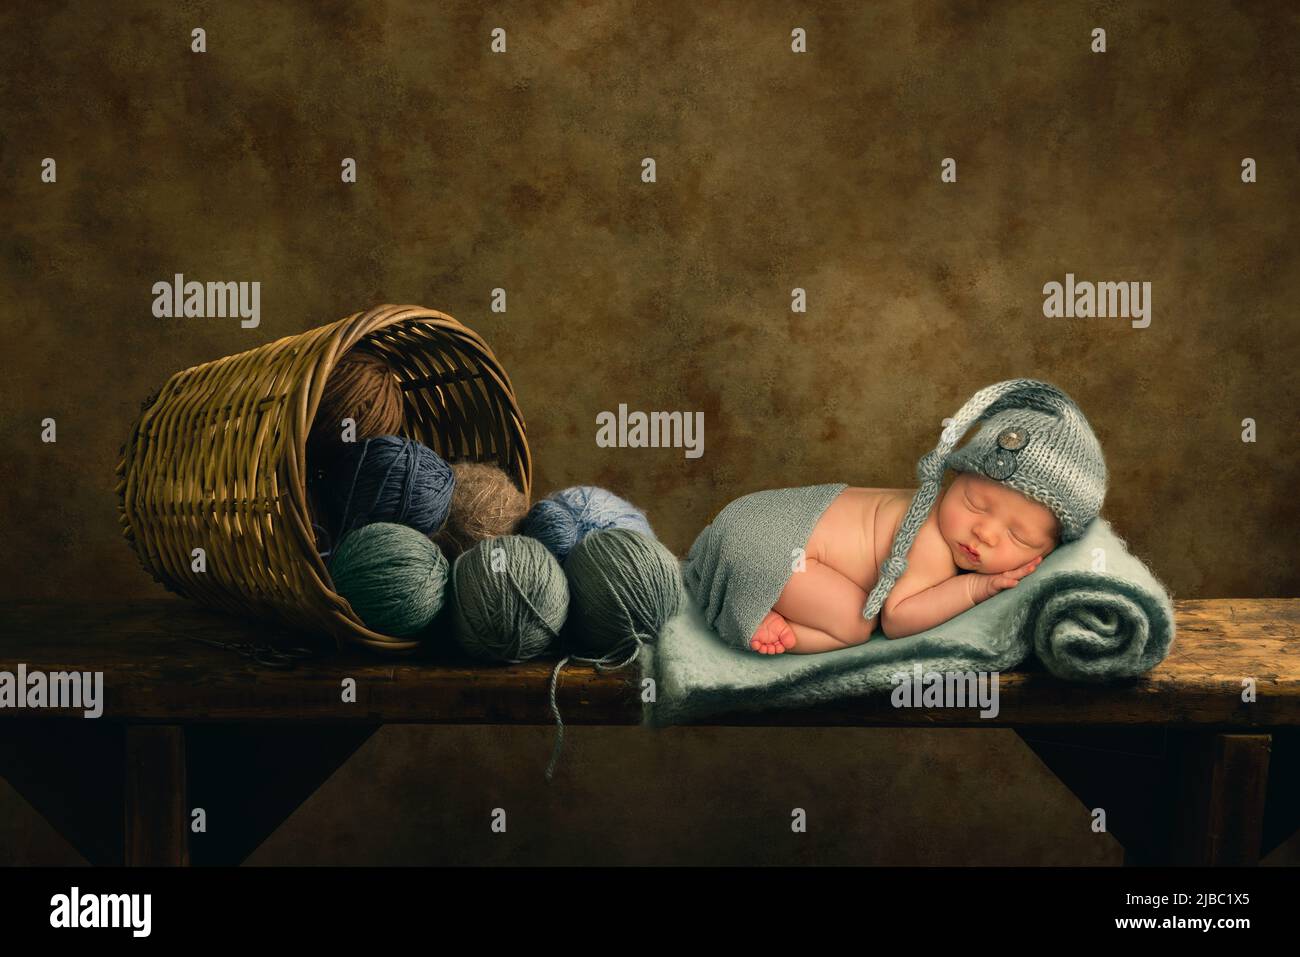 Adorable little newborn baby boy of only 11 days old sleeping on soft blue knitted wool Stock Photo